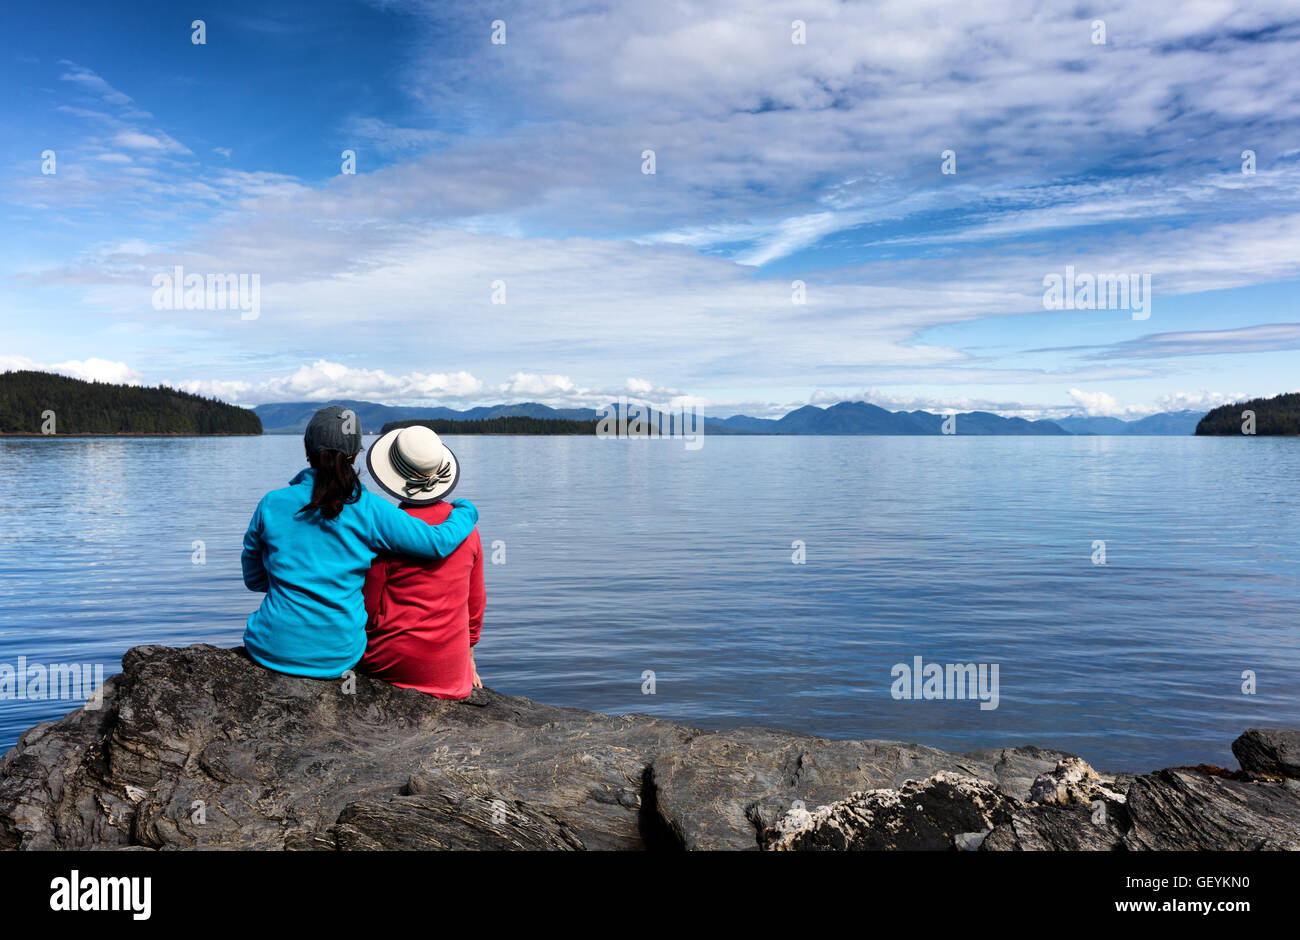 Daughter and mother, facing away from camera, enjoying the outdoors on a beautiful day with lake and mountains in background. Stock Photo